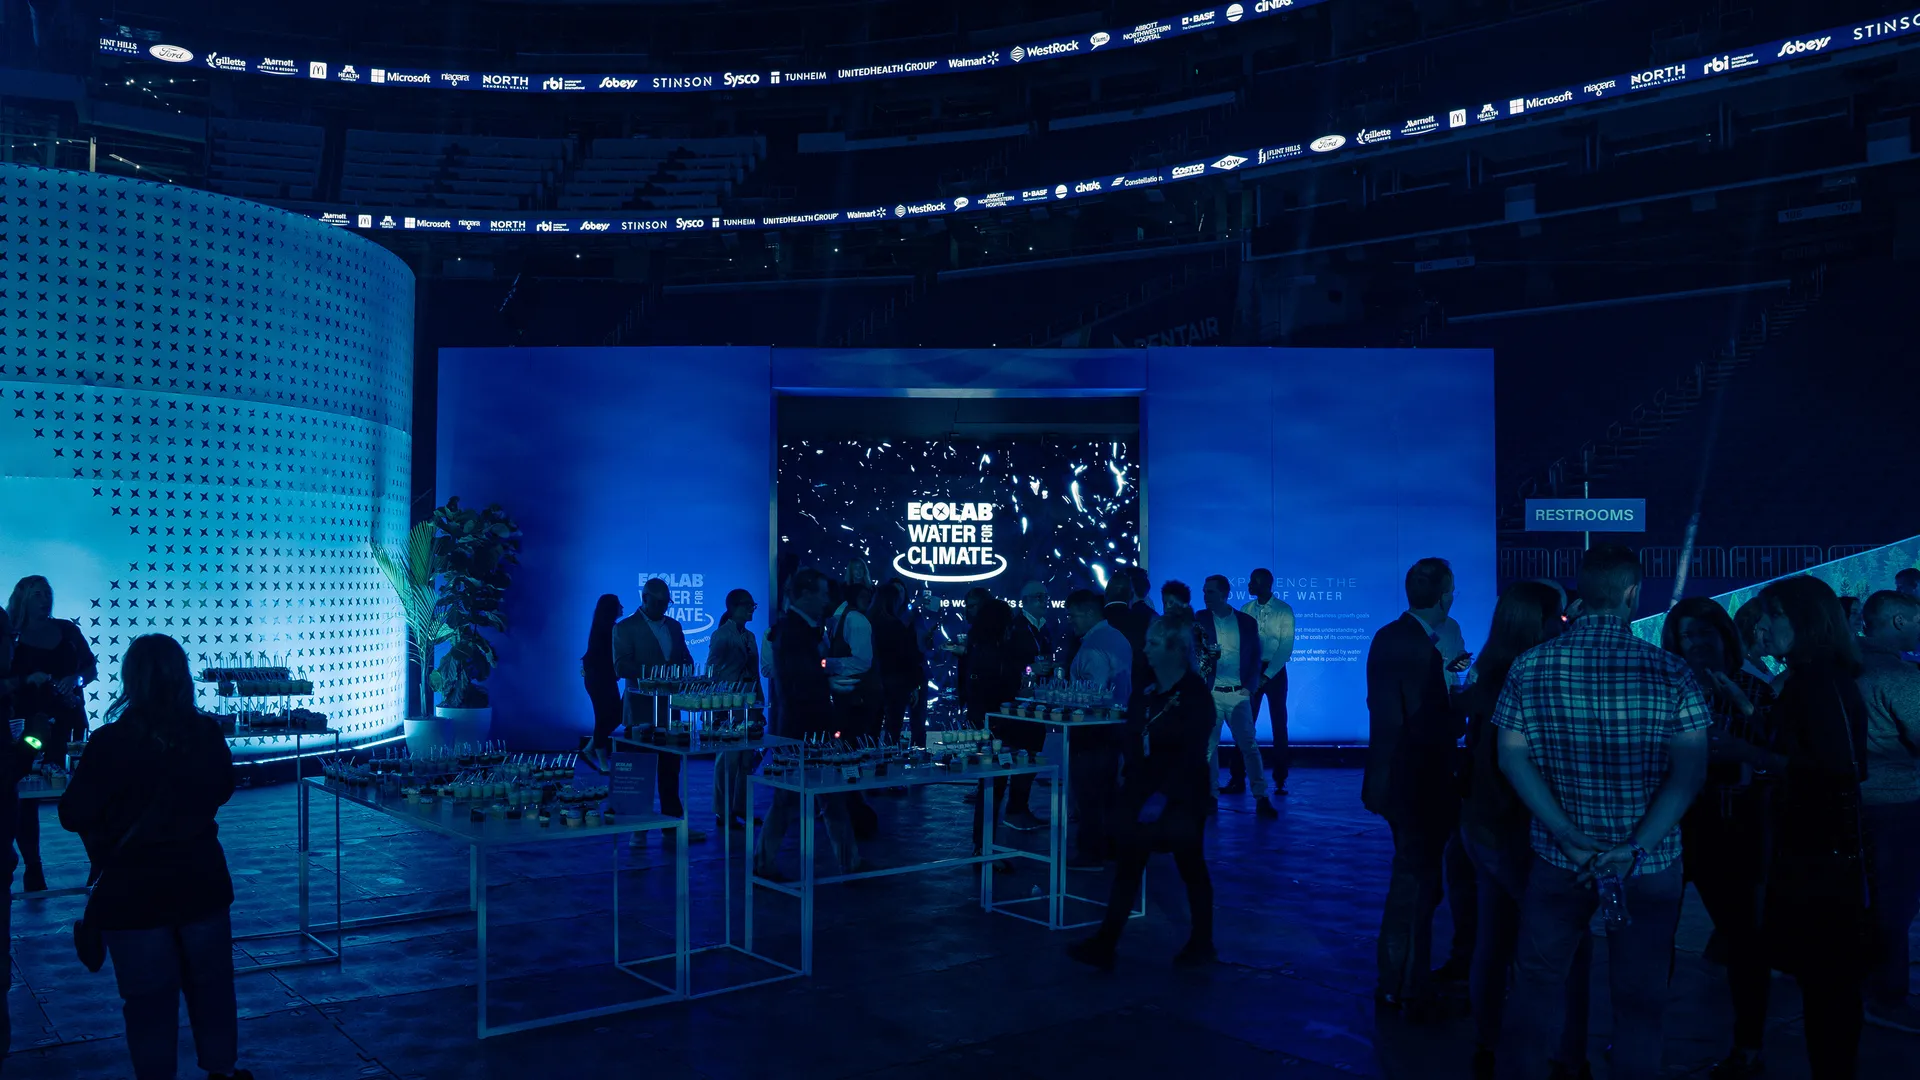 A photo of the Power of Water installation at the US Bank Stadium from outside lit with blue lighting. The Ecolab Water for Climate logo prominently displayed on the screen. many people standing around enjoying drinks and delicious treats.